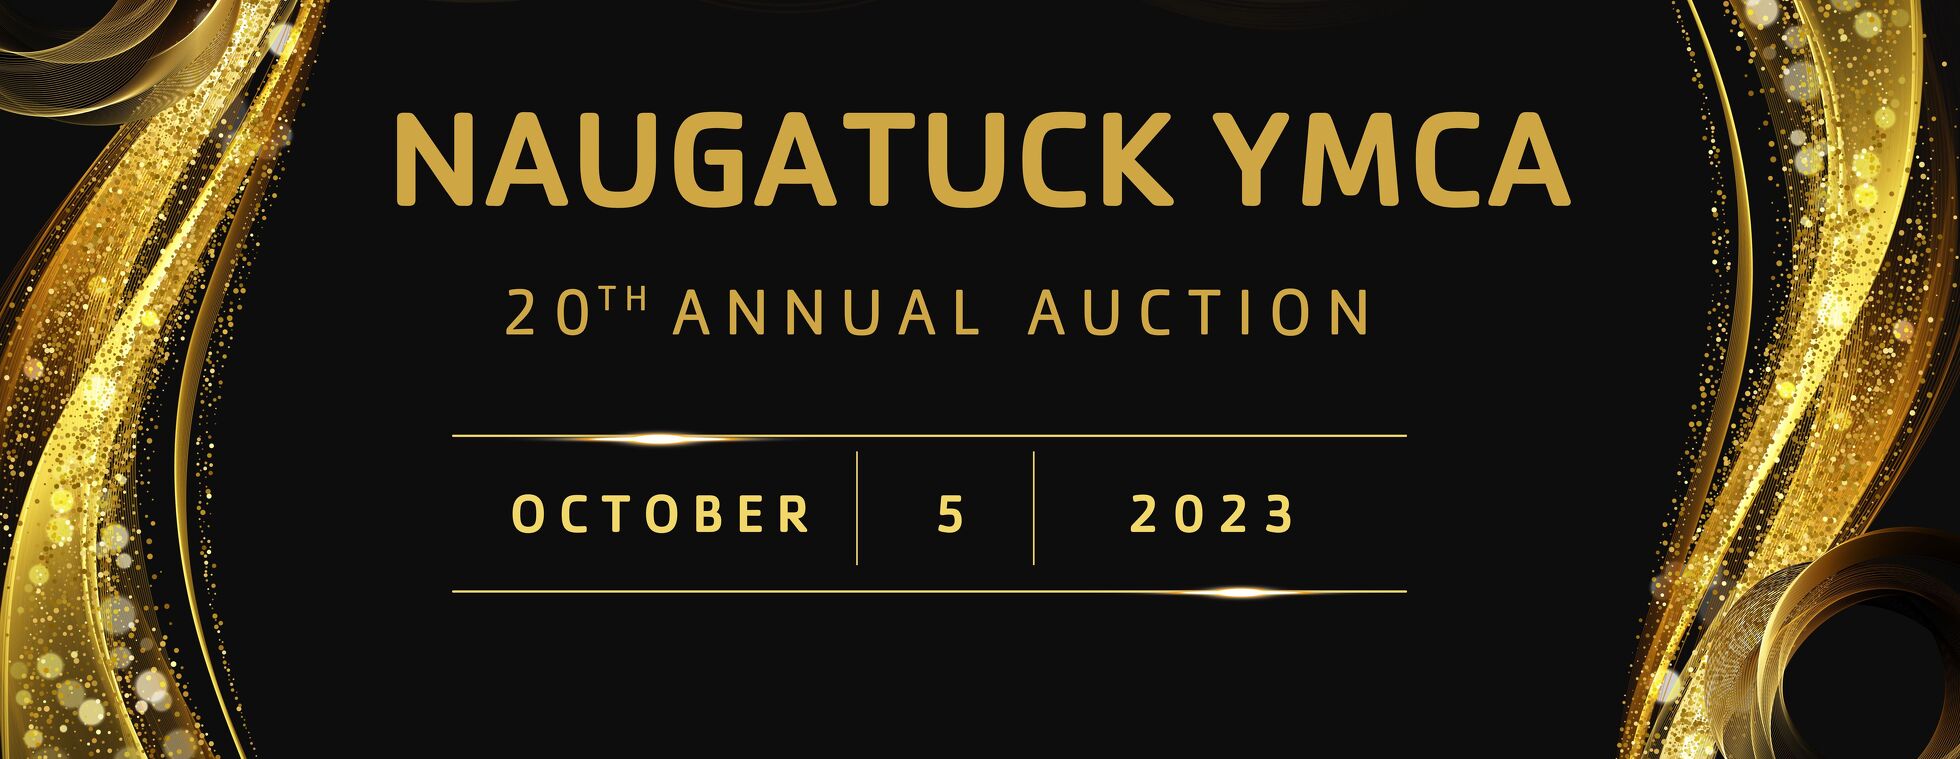 Naugatuck YMCA 20th Annual Auction "Why the Y"